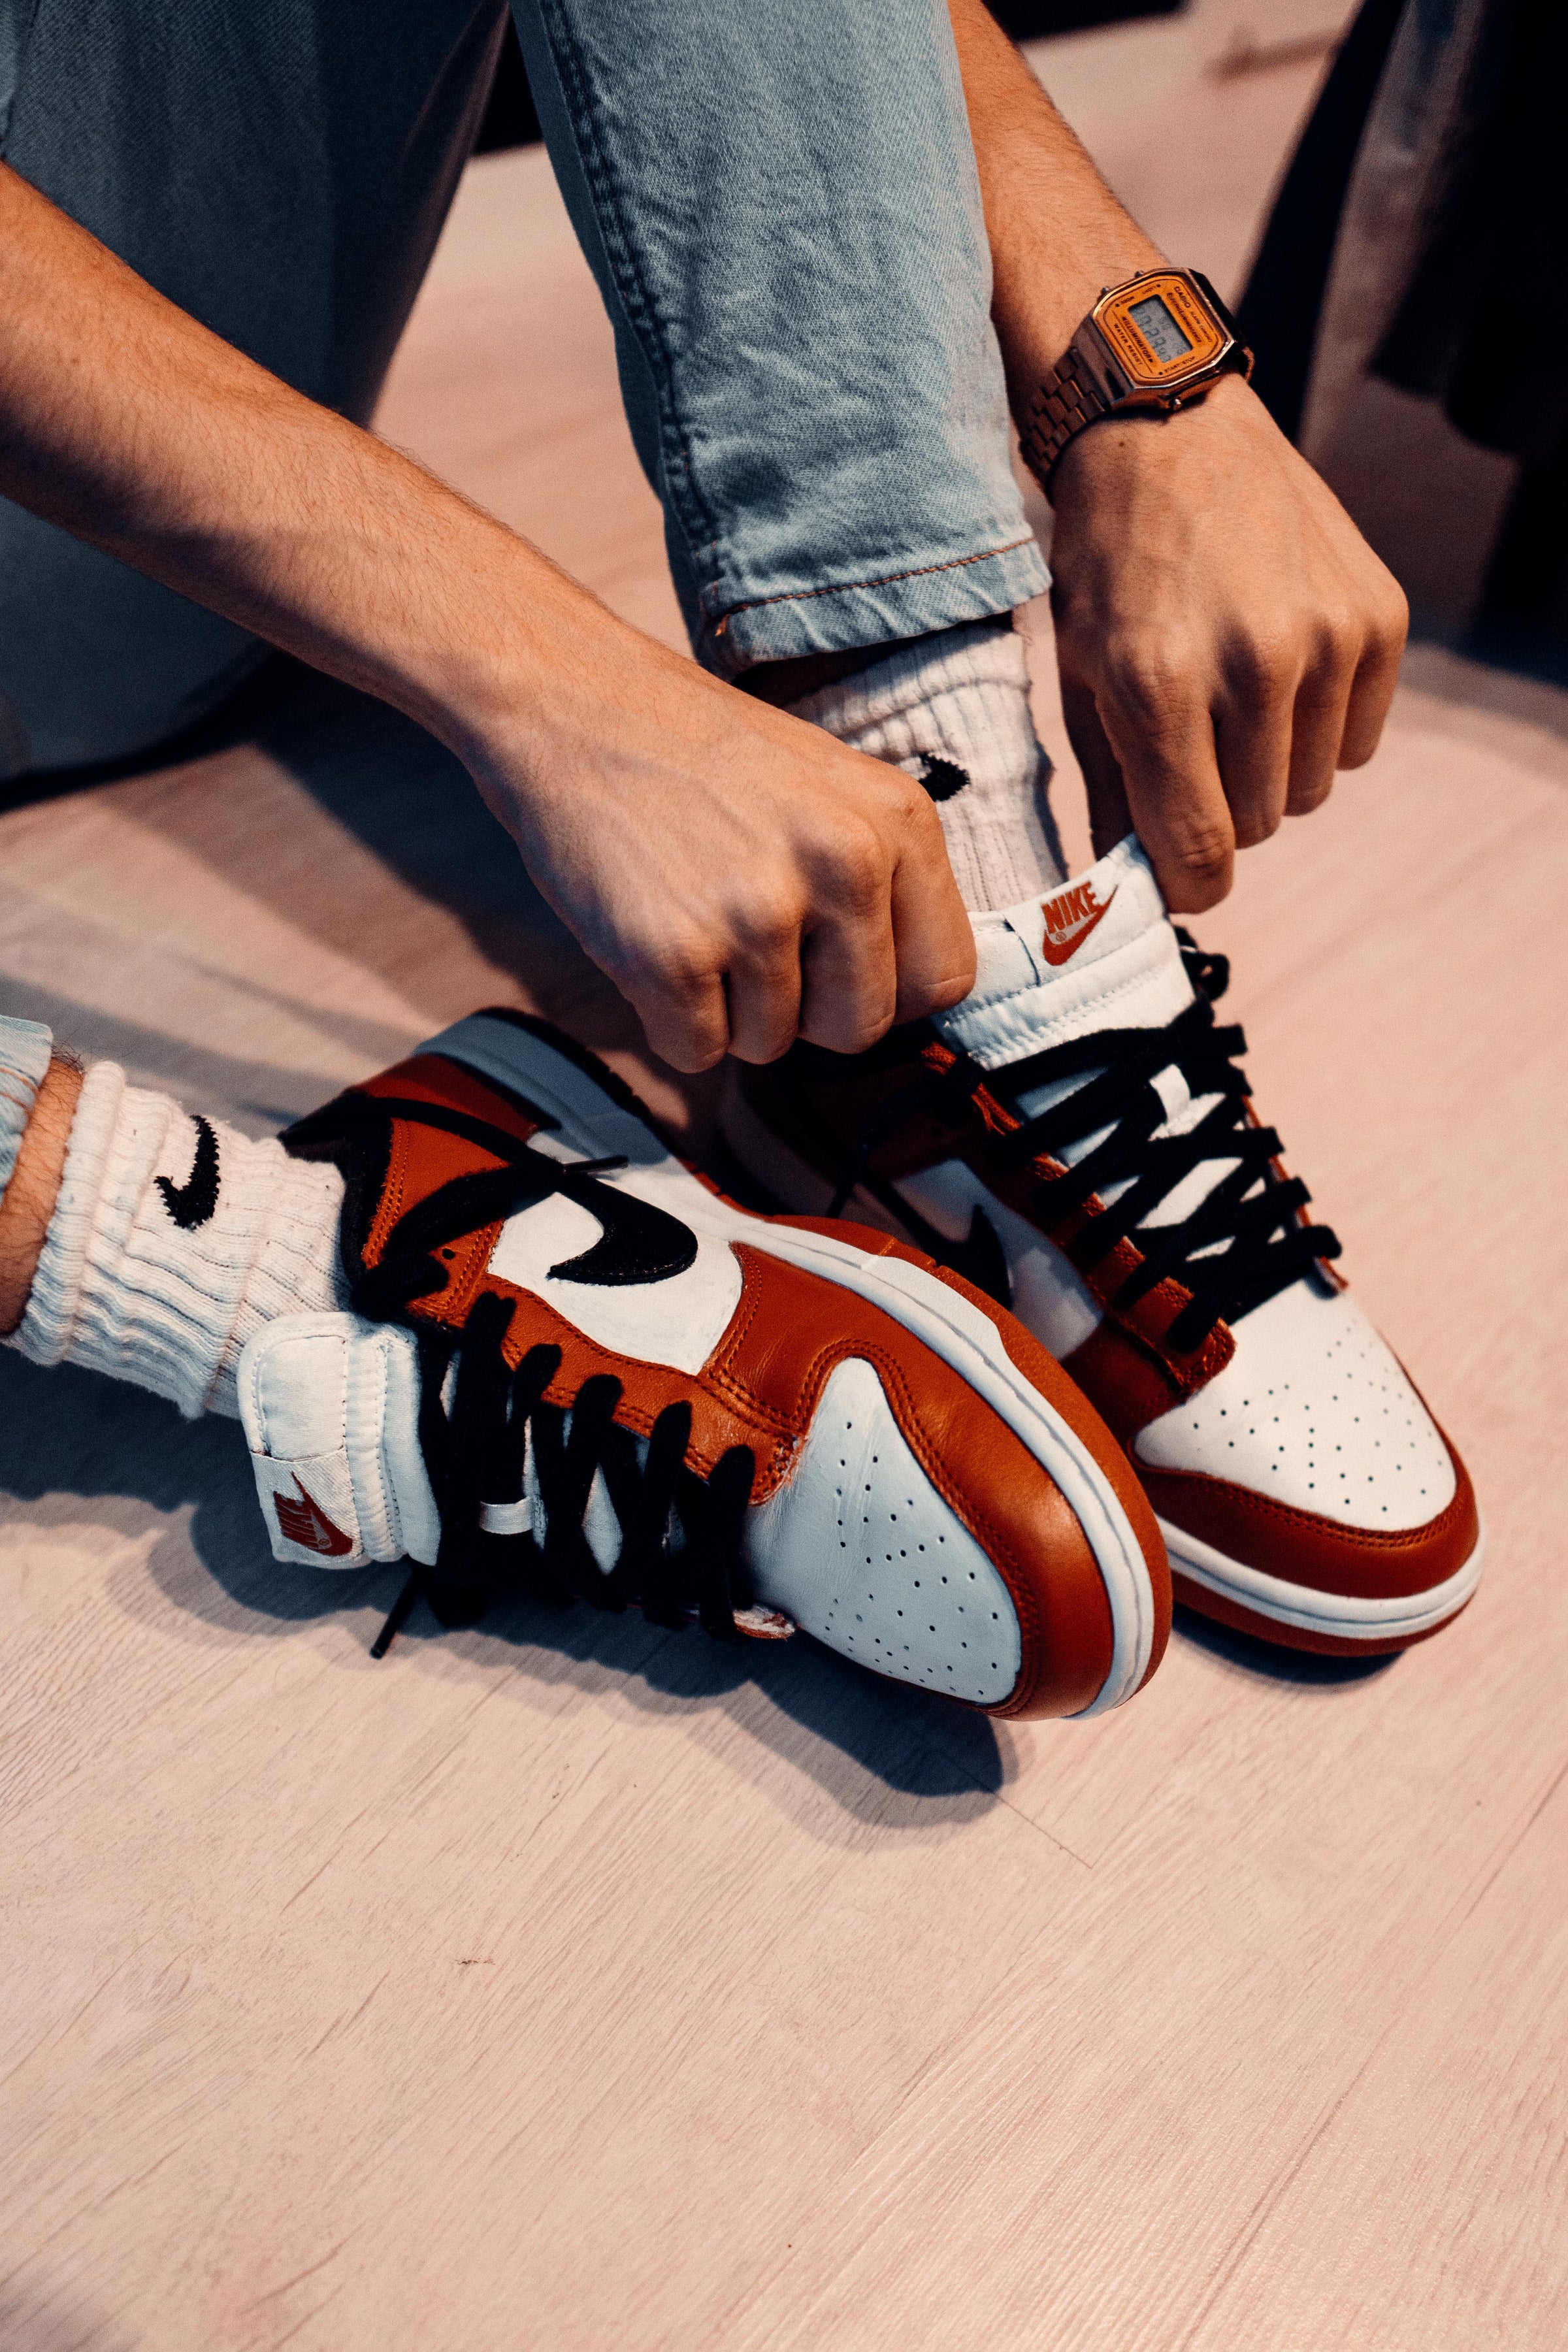 Dunk_low_anniversary-Foot World stocking authentic Jordan Nike Adidas find the sneakers you want